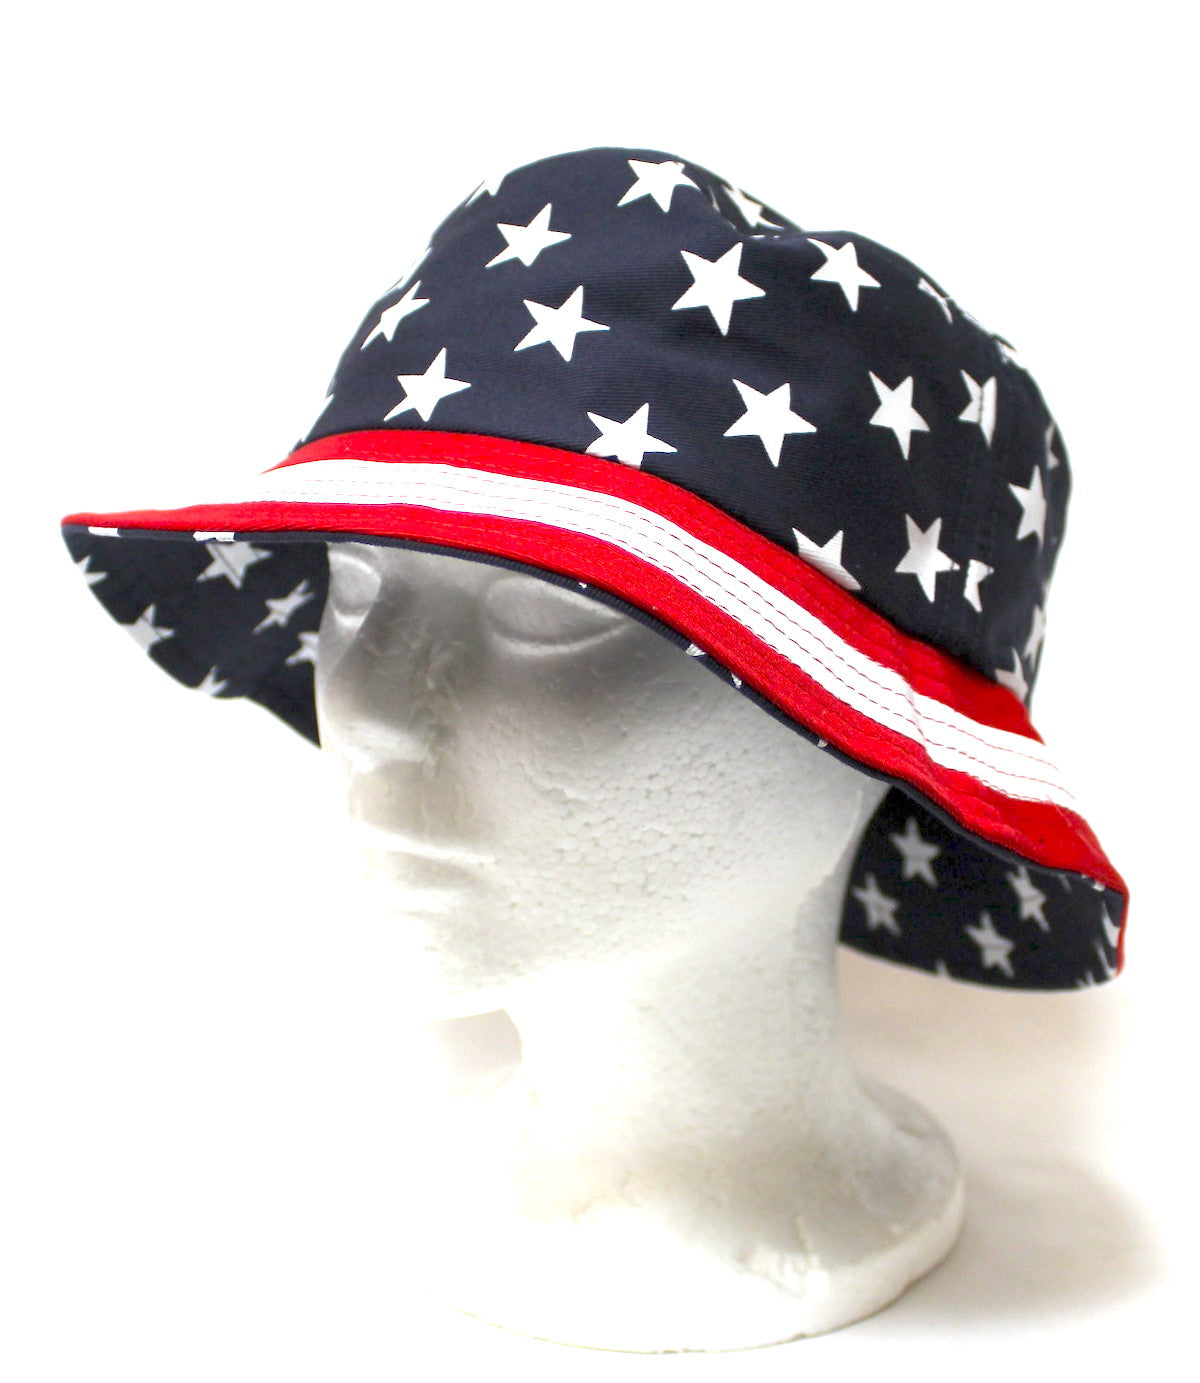 CAPS 'N VINTAGE Unisex USA Bucket Hat American Flag Colors, One Size Navy